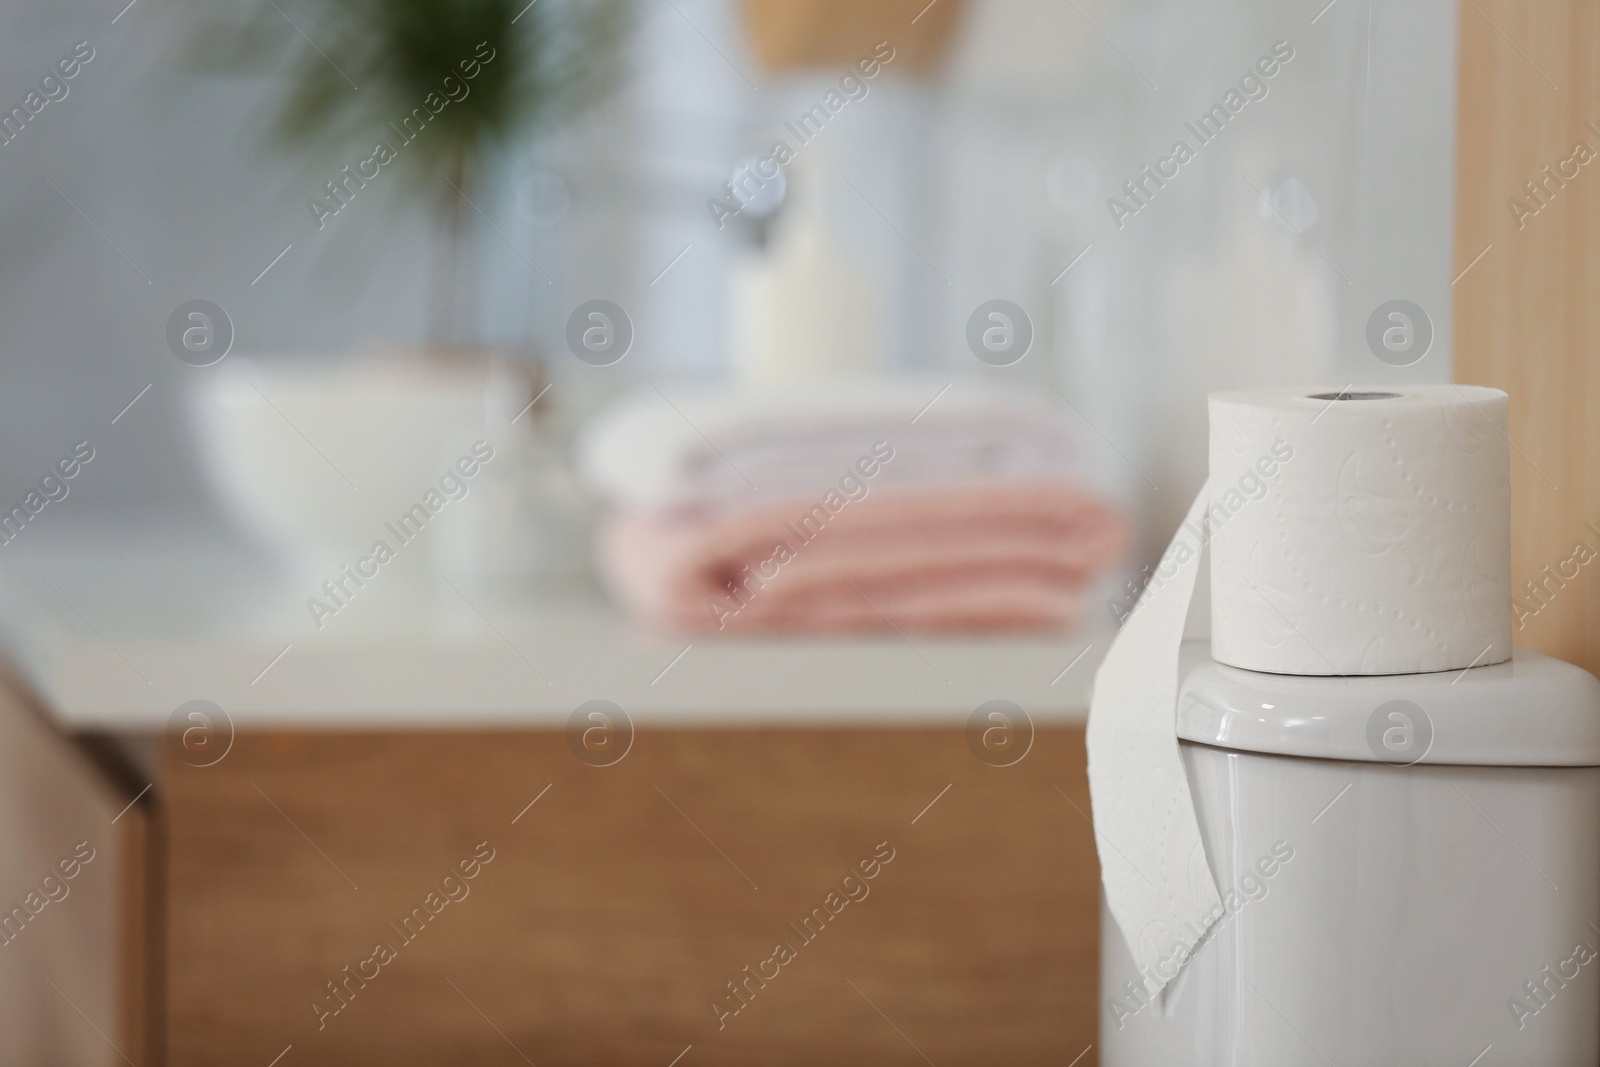 Photo of Paper roll on tank of toilet bowl in bathroom, space for text